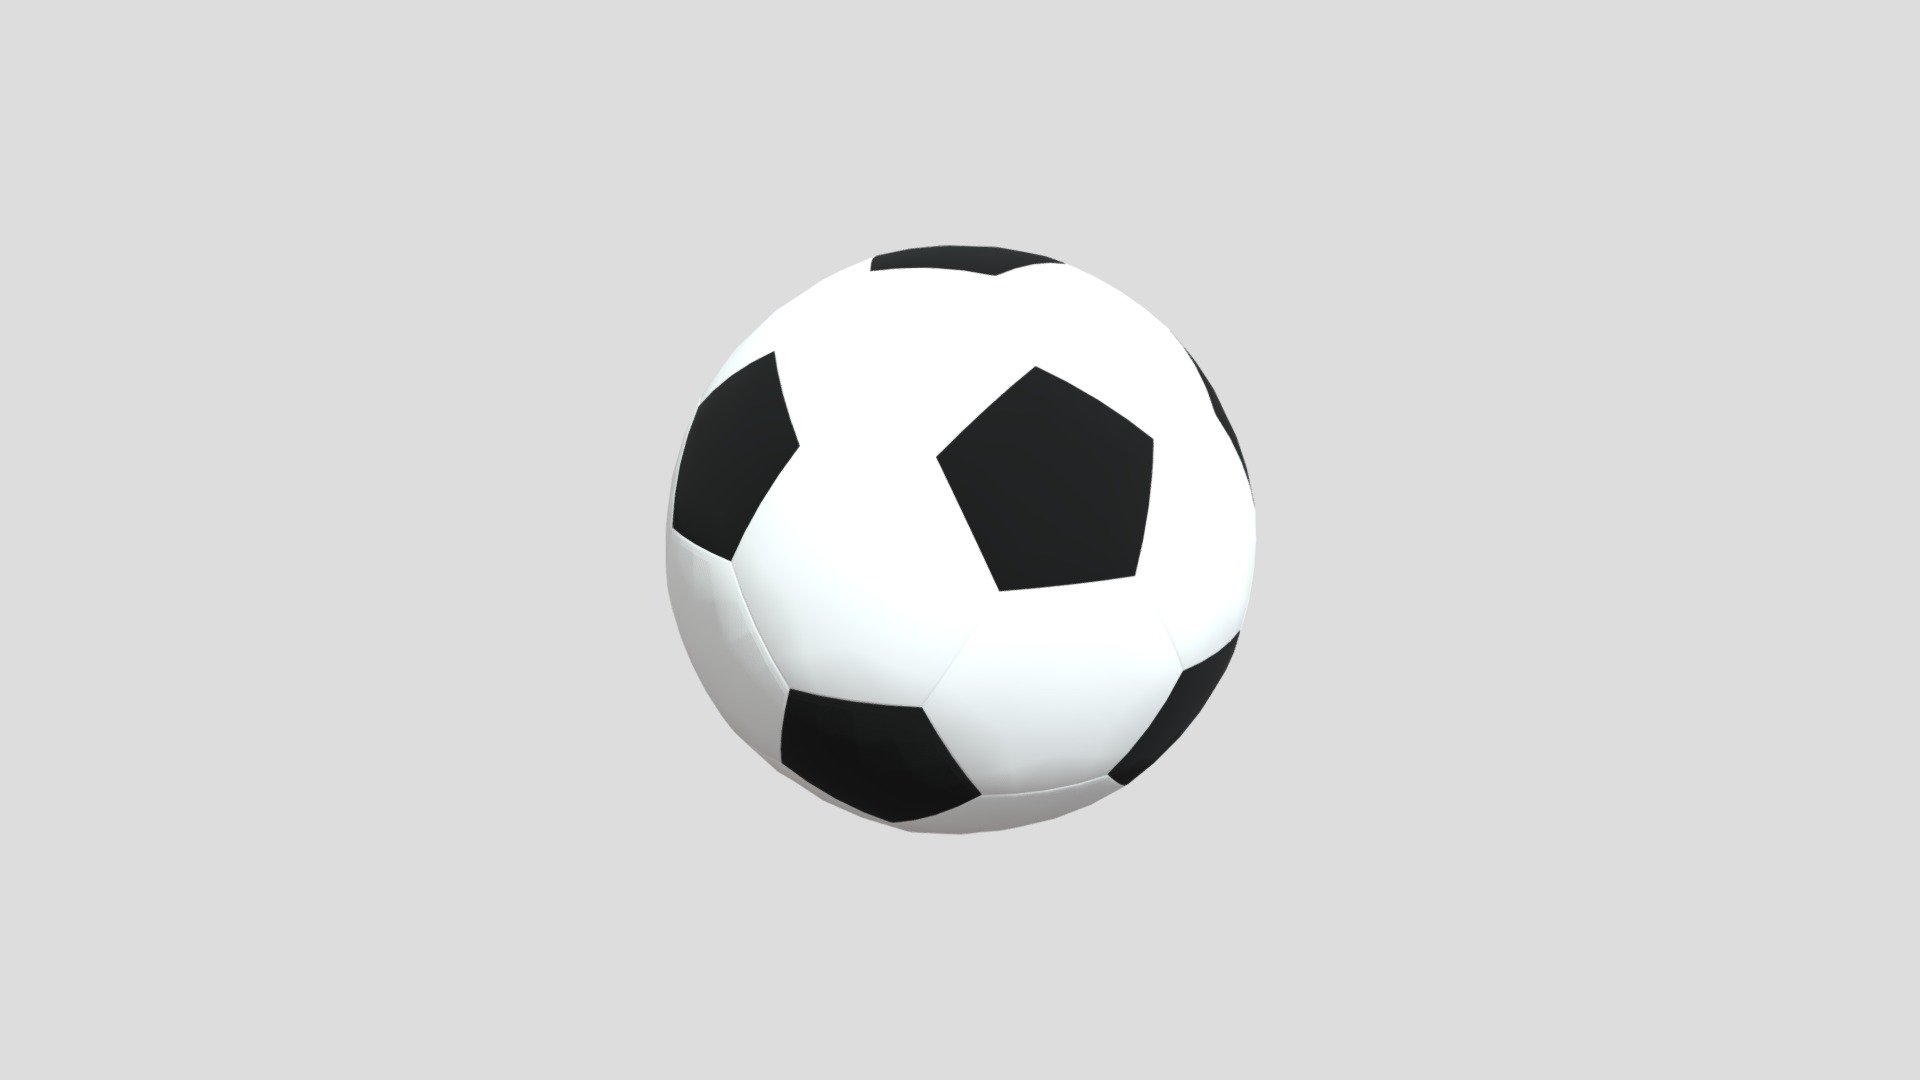 Classic Football/Soccer Ball which can be used in many scenery like a football pitch or even just in a sports bag.

This 3D model is available in:

Blend

obj

stl

mtl

fbx

This model contains: polygons: 7,200 Vertices: 3,602 - Football/Soccer Ball - 3D model by Repar2harvey 3d model